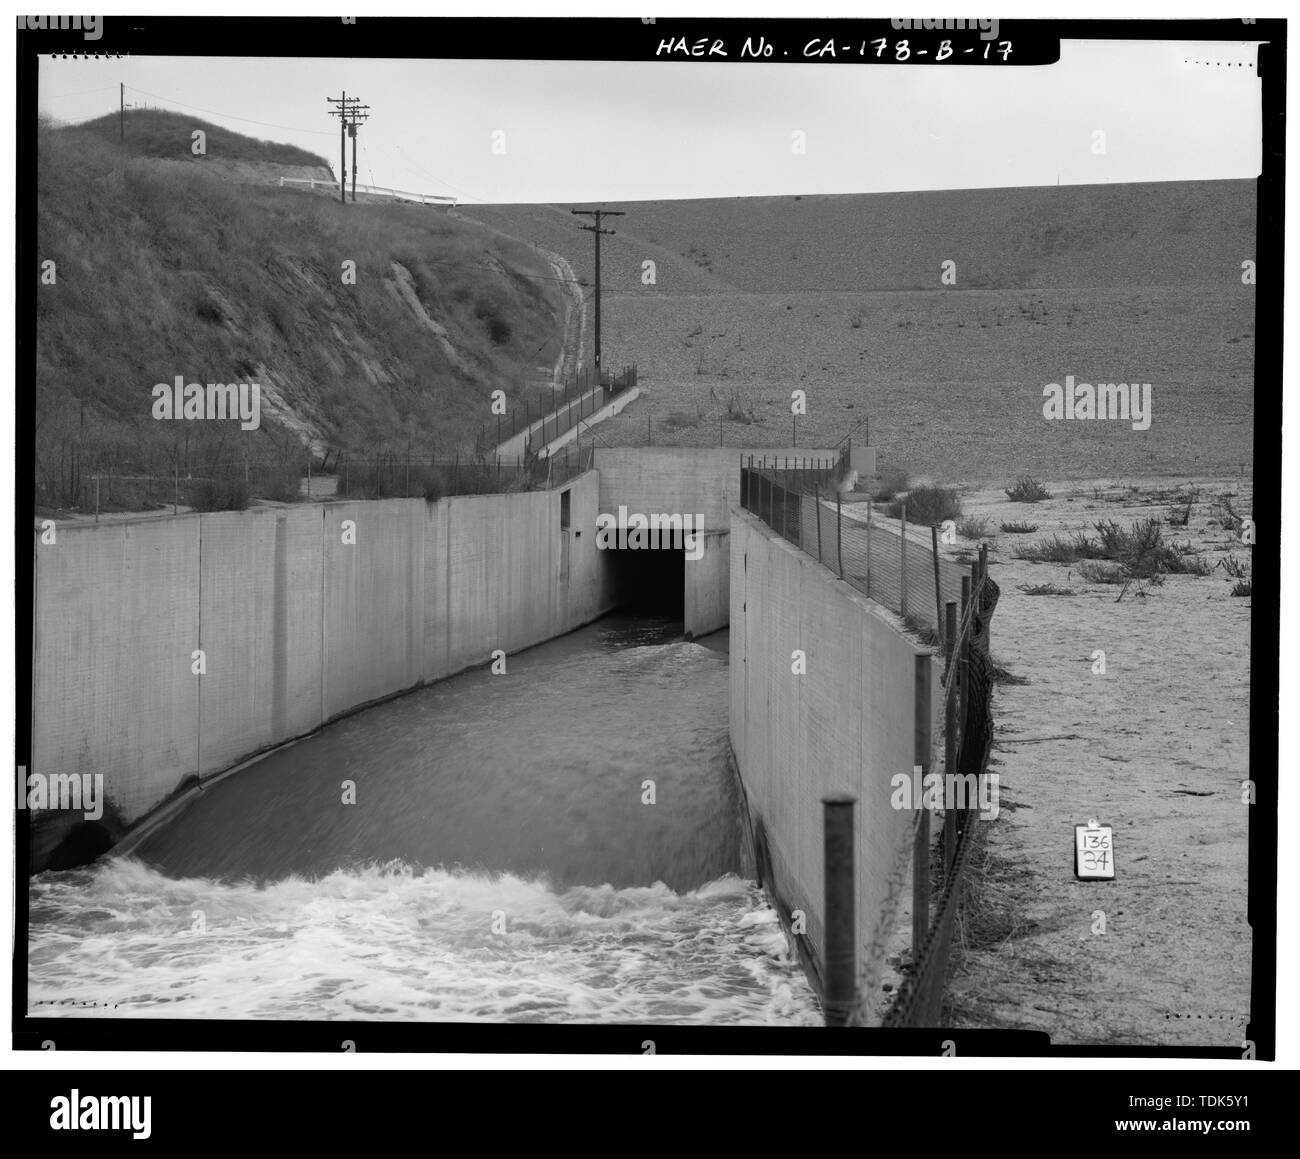 OUTLET STRUCTURE, LOOKING NORTH. NOTE ALSO THE DRAINAGE CHANNEL AND  CONCRETE FLUME ALONG WEST EDGE OF EMBANKMENT. - Prado Dam, Outlet Works,  Santa Ana River near junction of State Highways 71 and